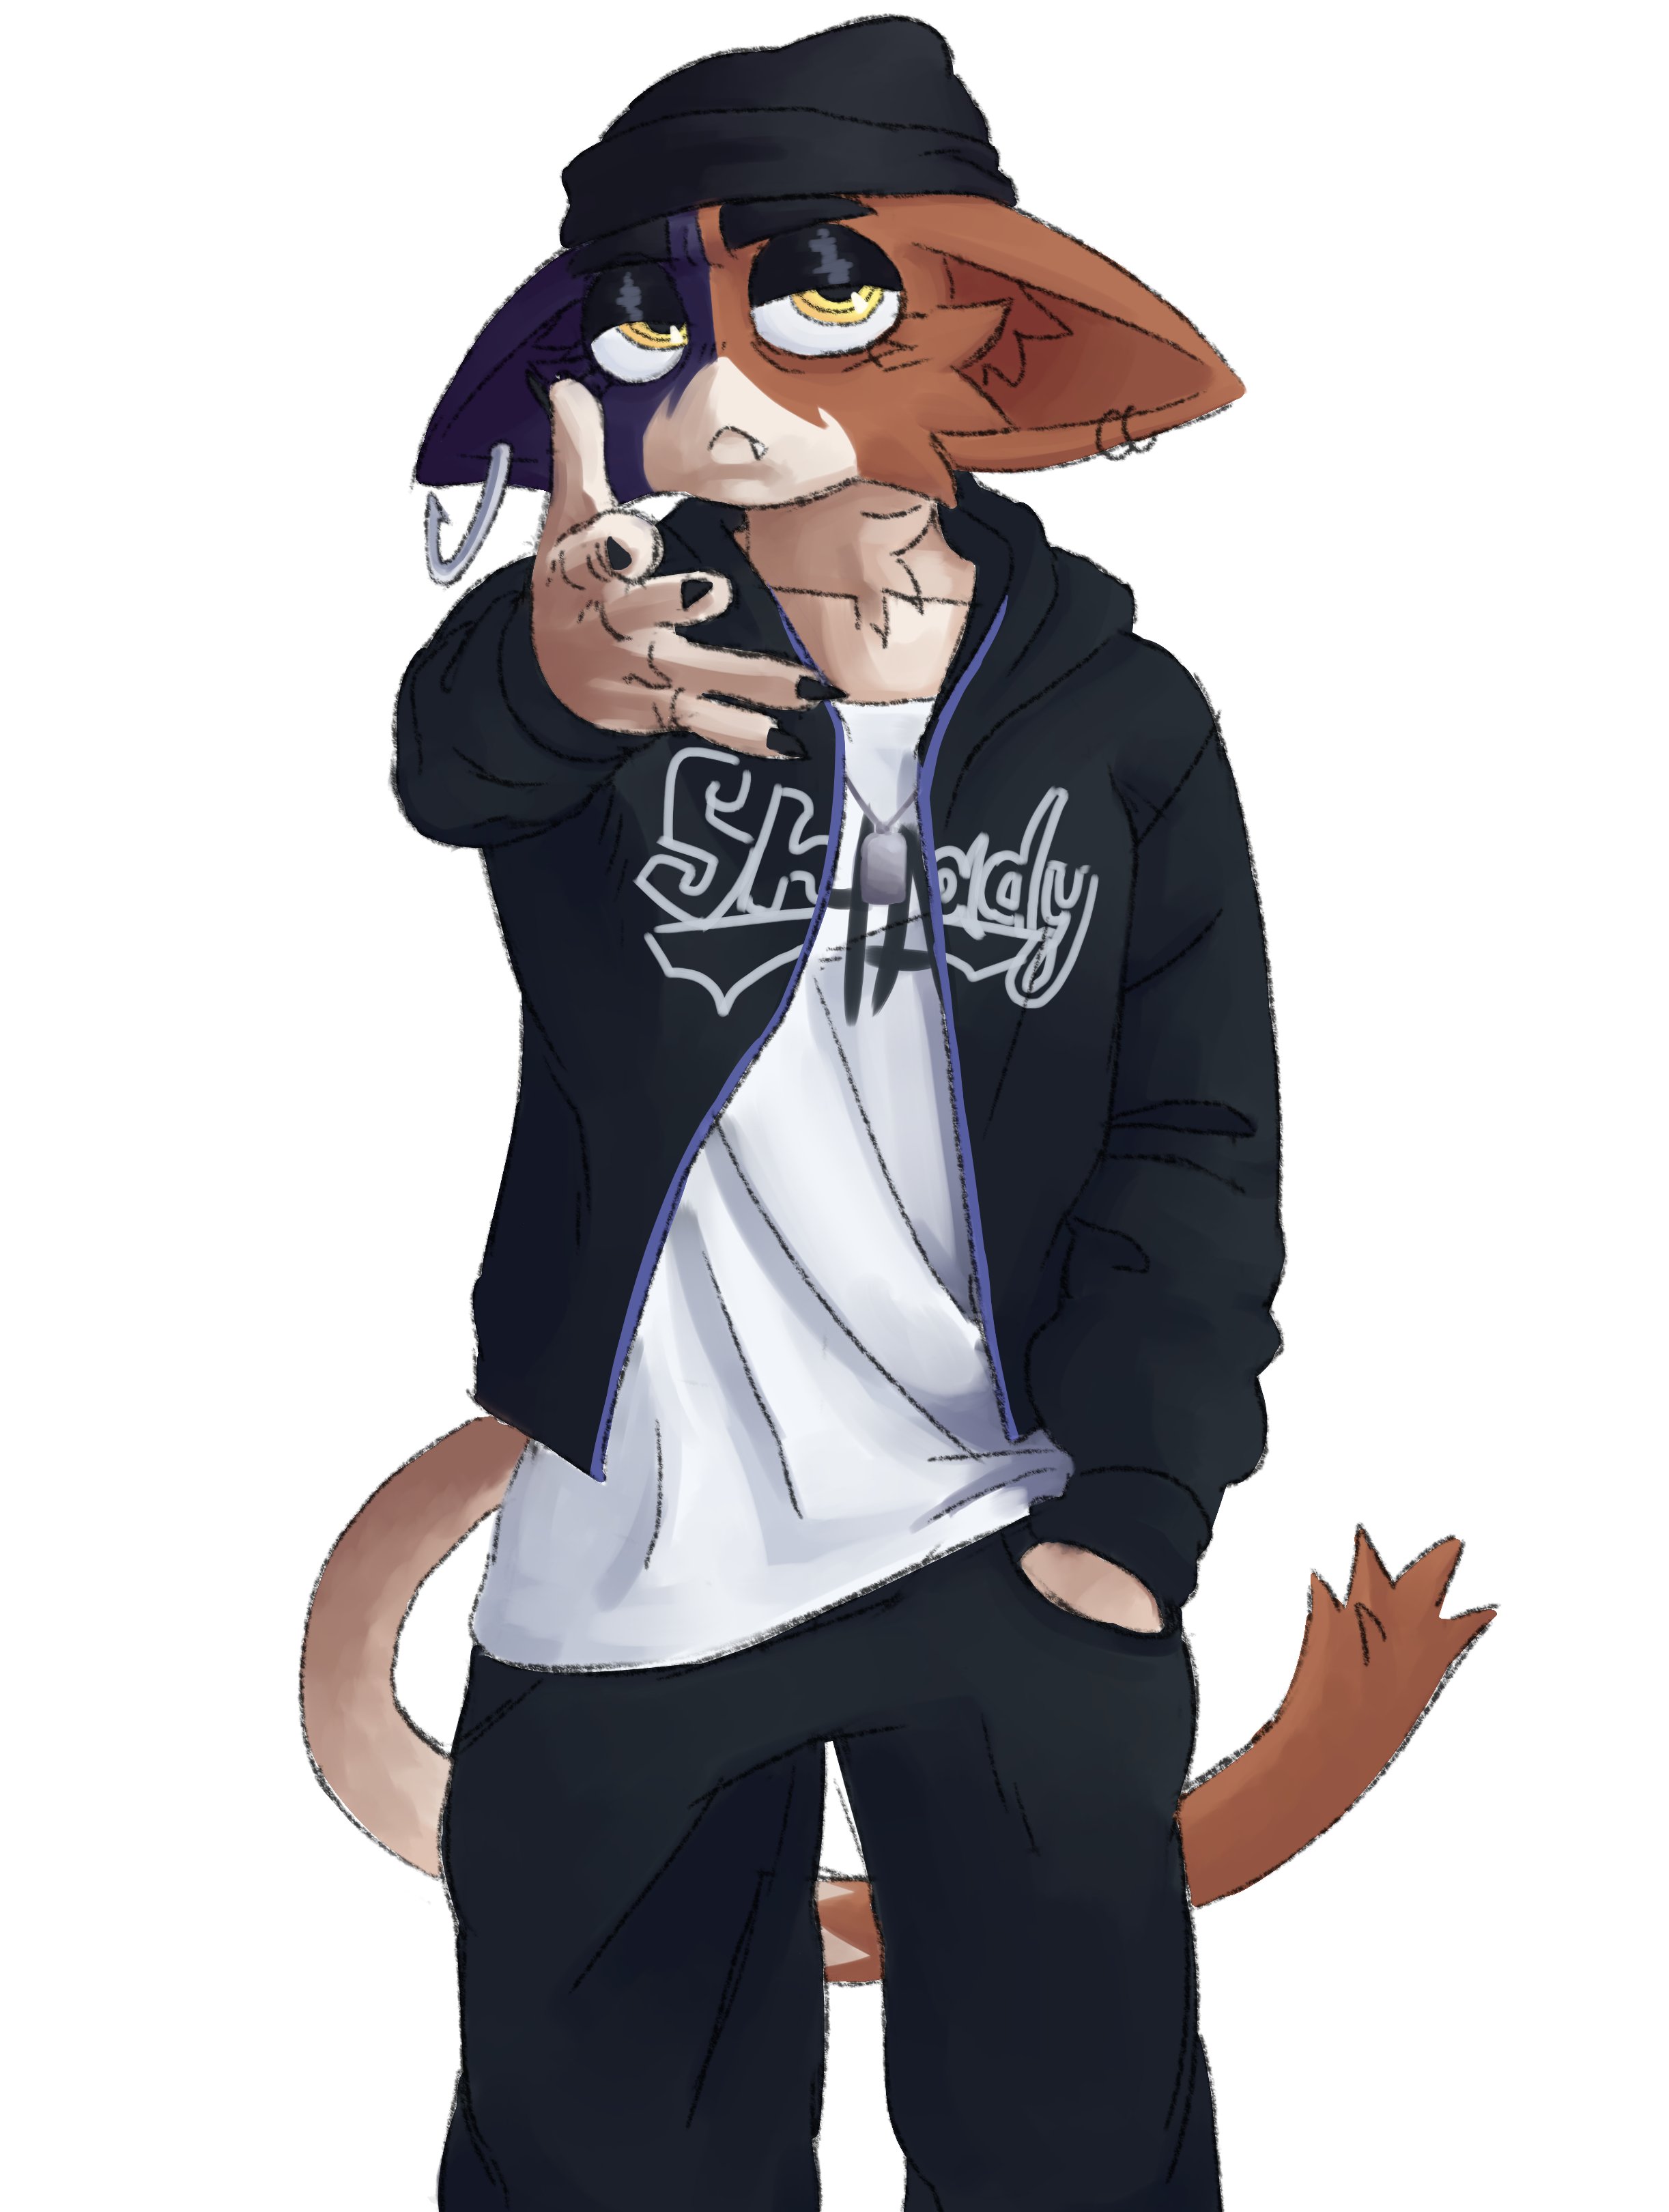 alNoodle (COMMS CLOSED) on X: the REAL slim shady #fortnite #meowskulls # eminem  / X